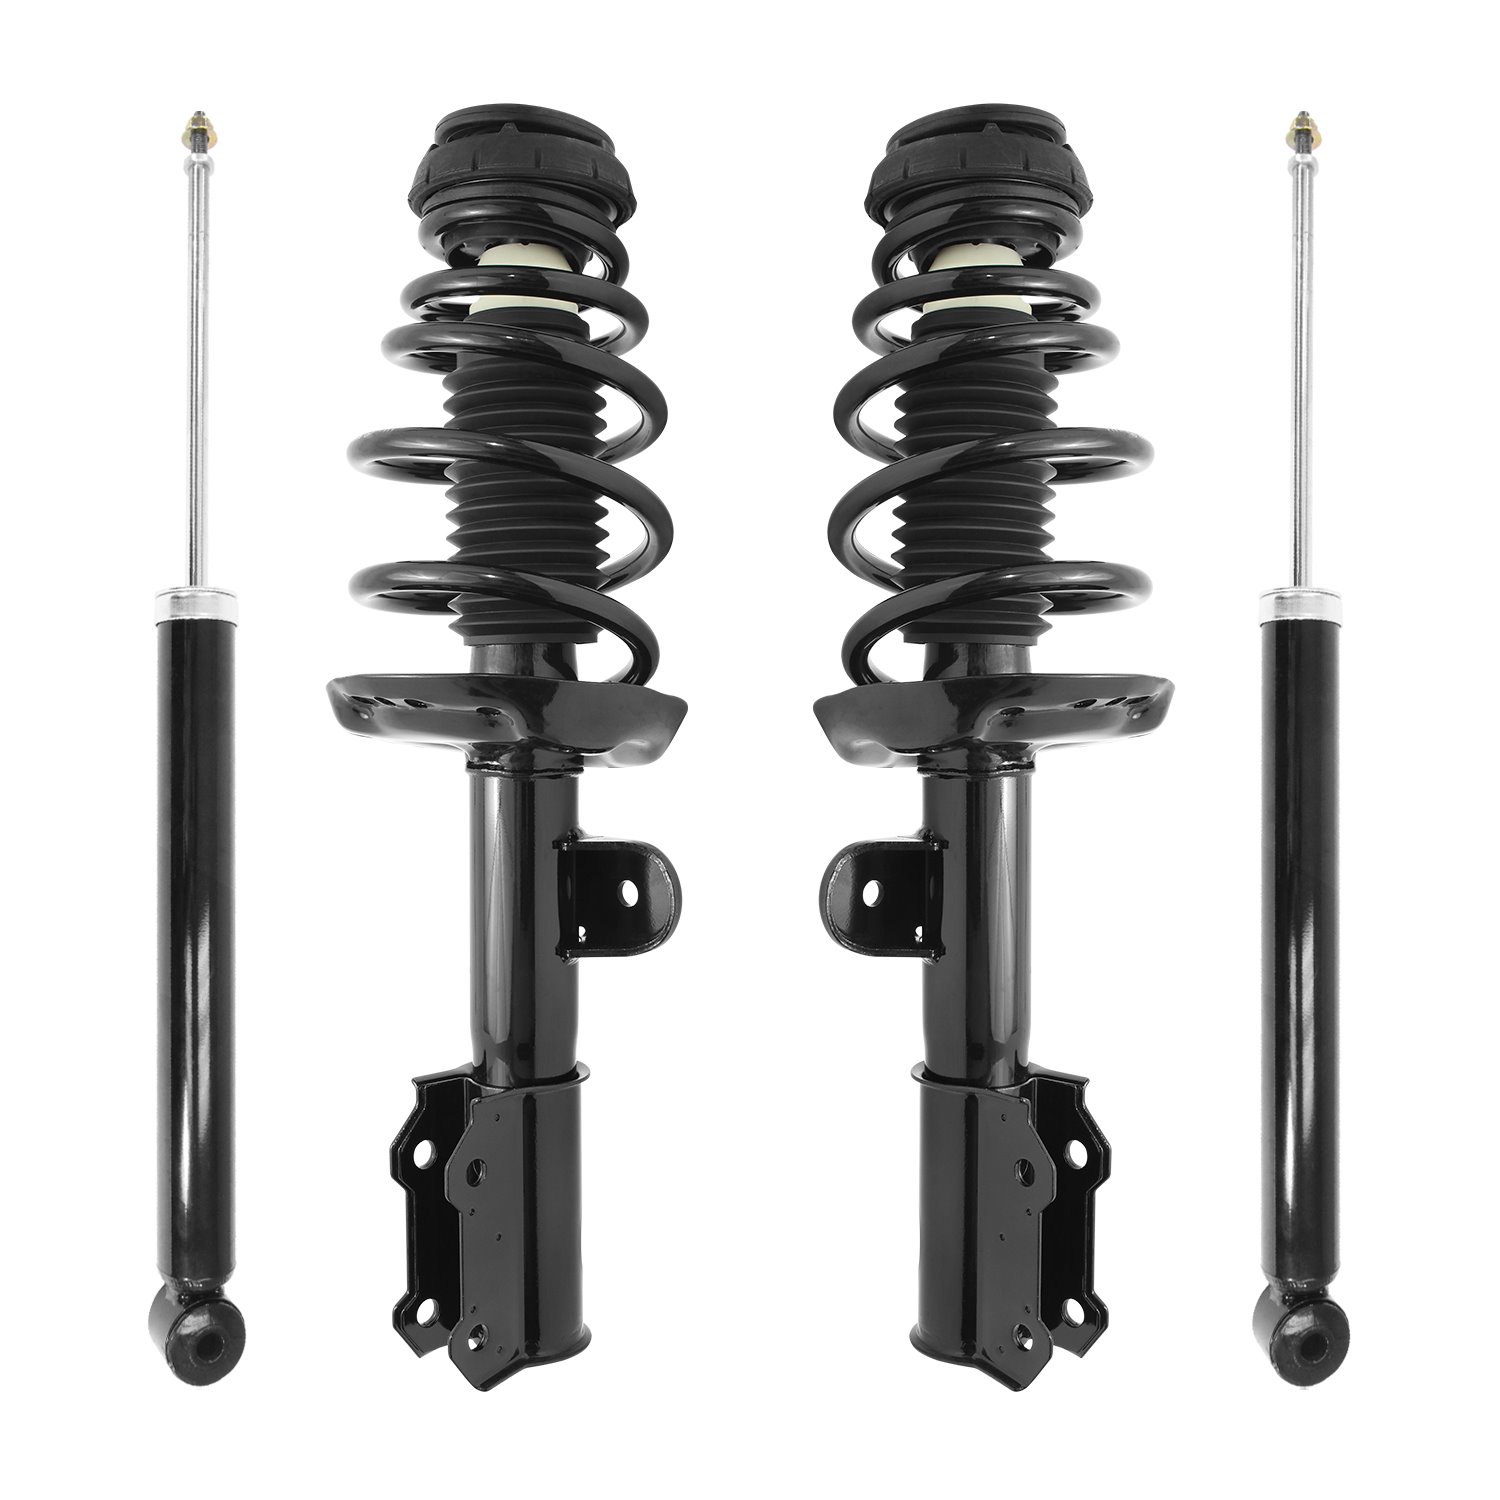 4-11053-251180-001 Front & Rear Suspension Strut & Coil Spring Assembly Fits Select Chevy Volt